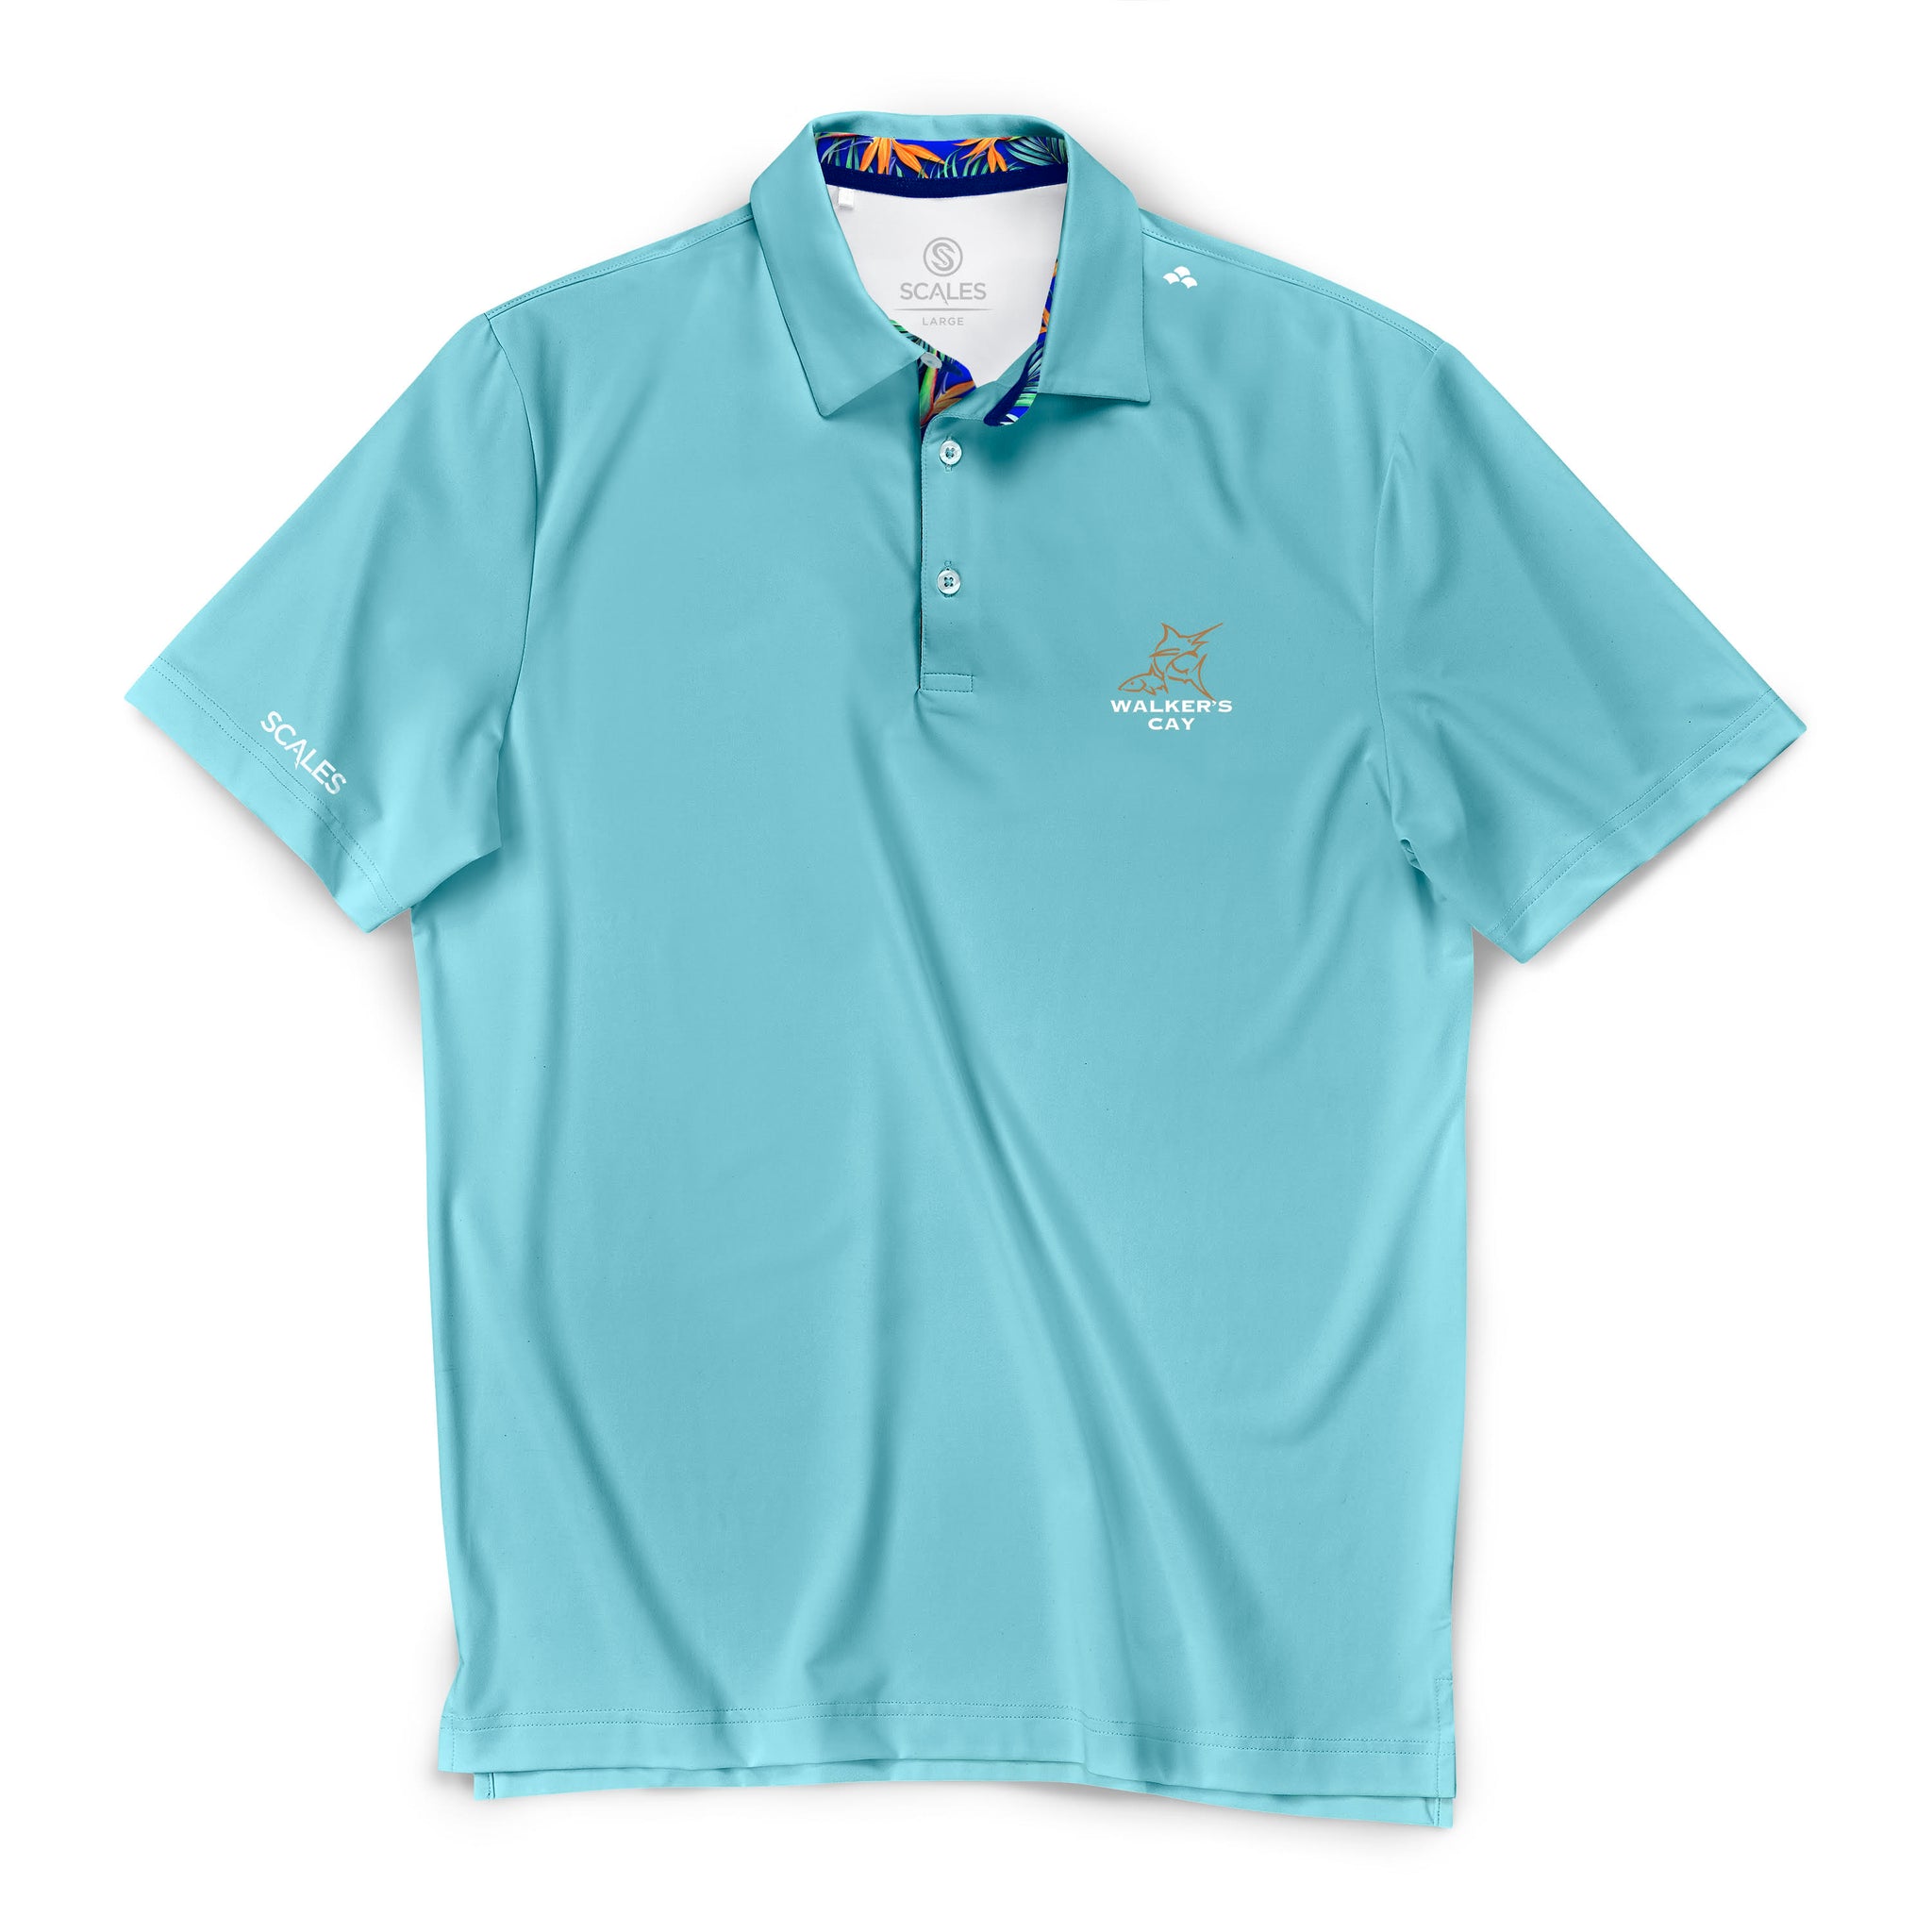 Scales Offshore Country Club Polo - Seafoam